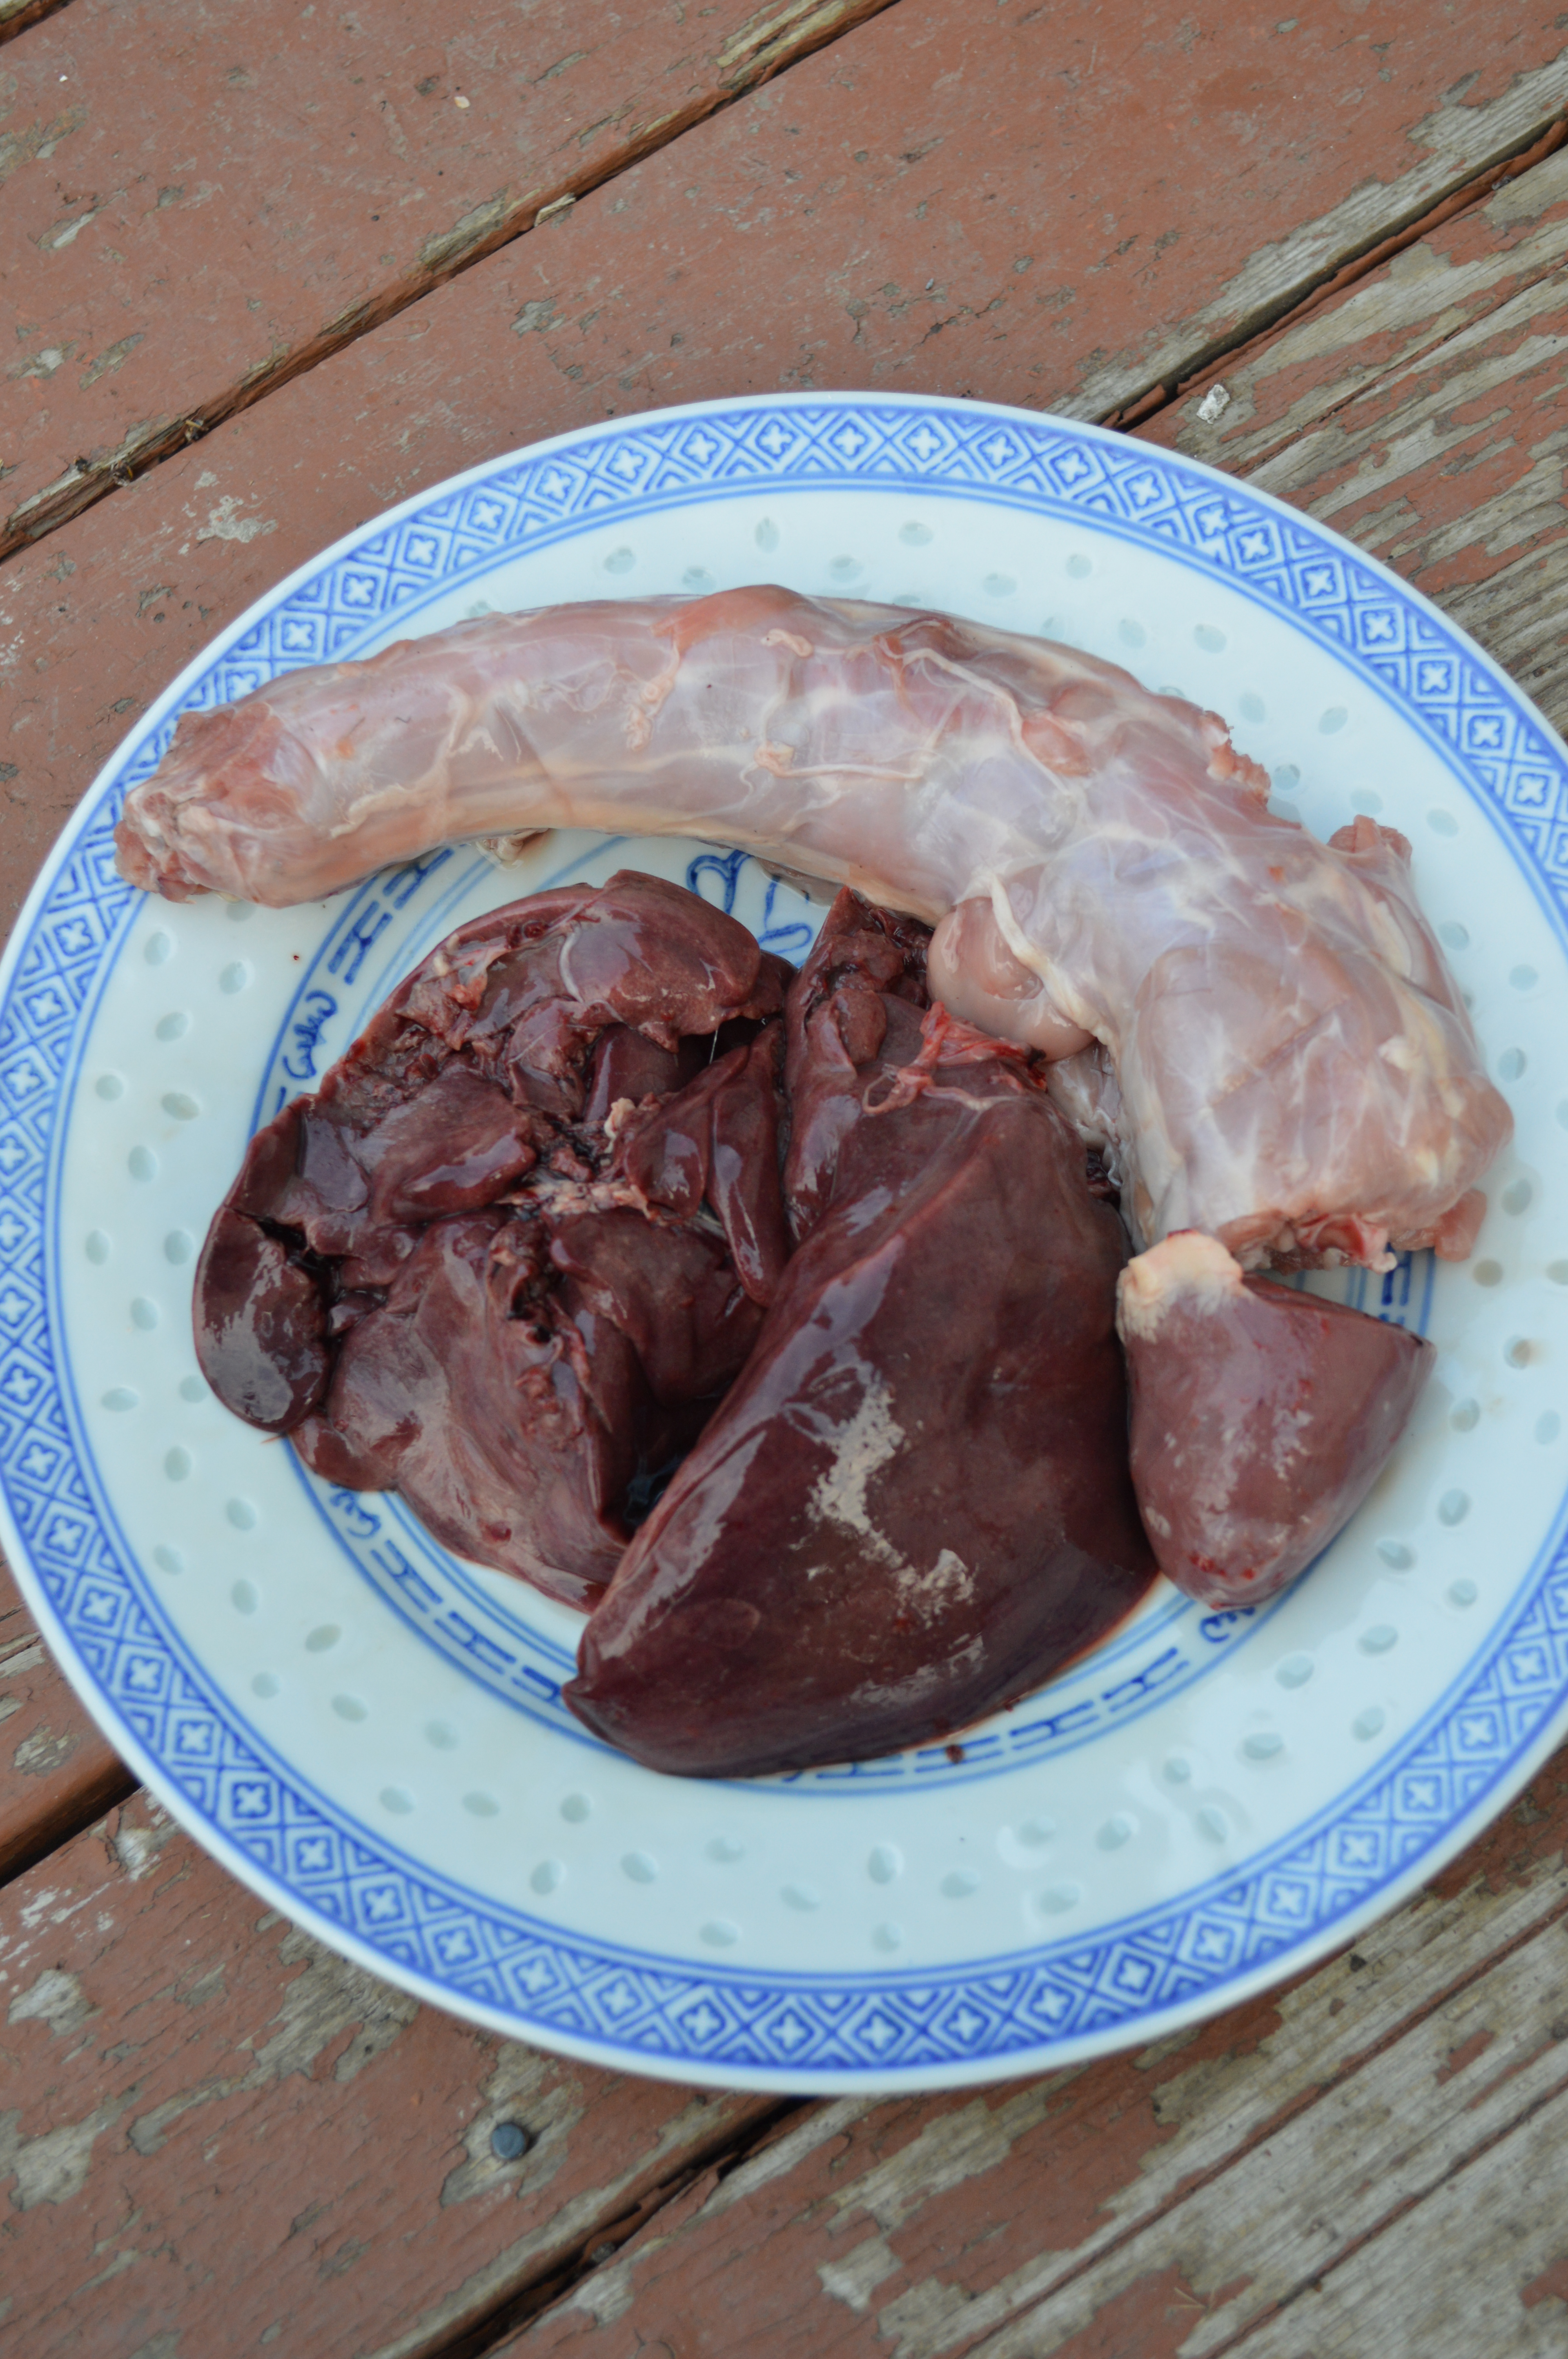 A plate of turkey giblets: neck, liver, and heart.